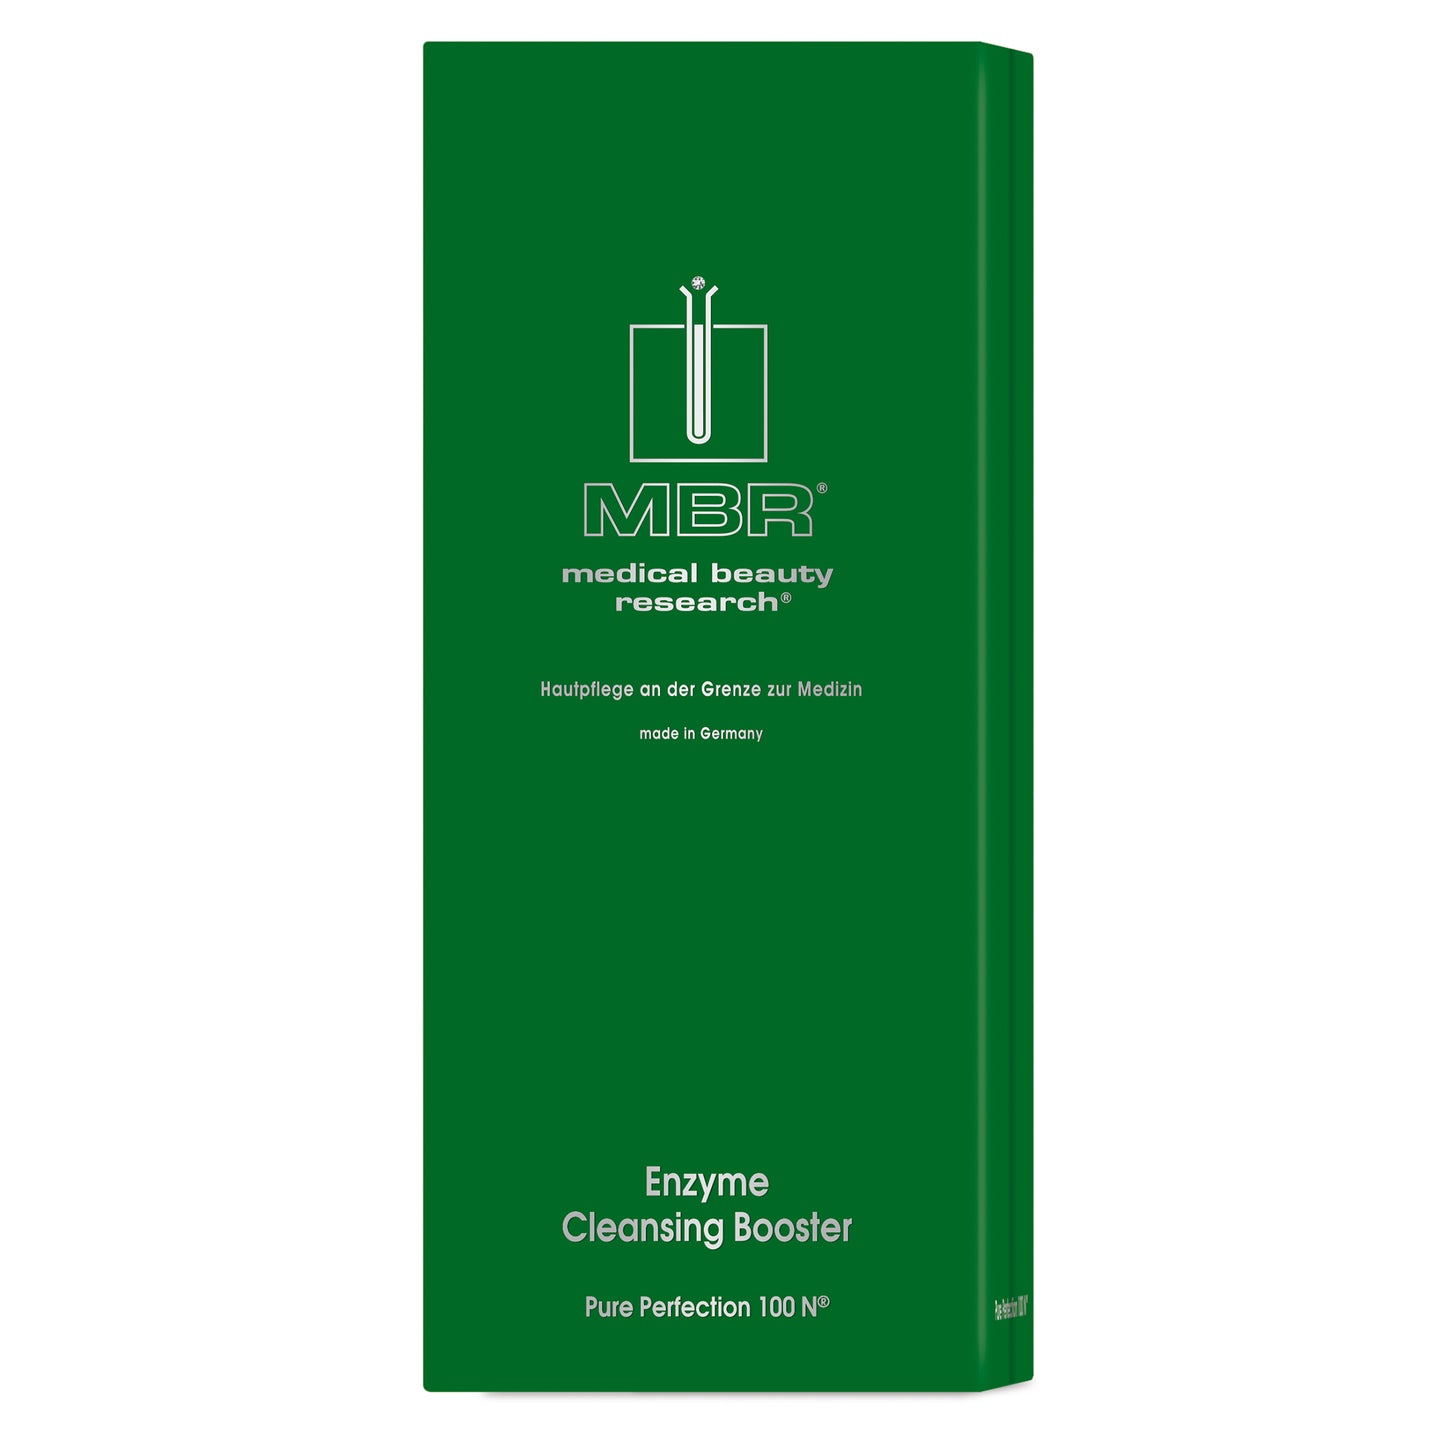 Enzyme Cleansing Booster: Detoxifying, Brightening and Regenerating Powder Cleanser